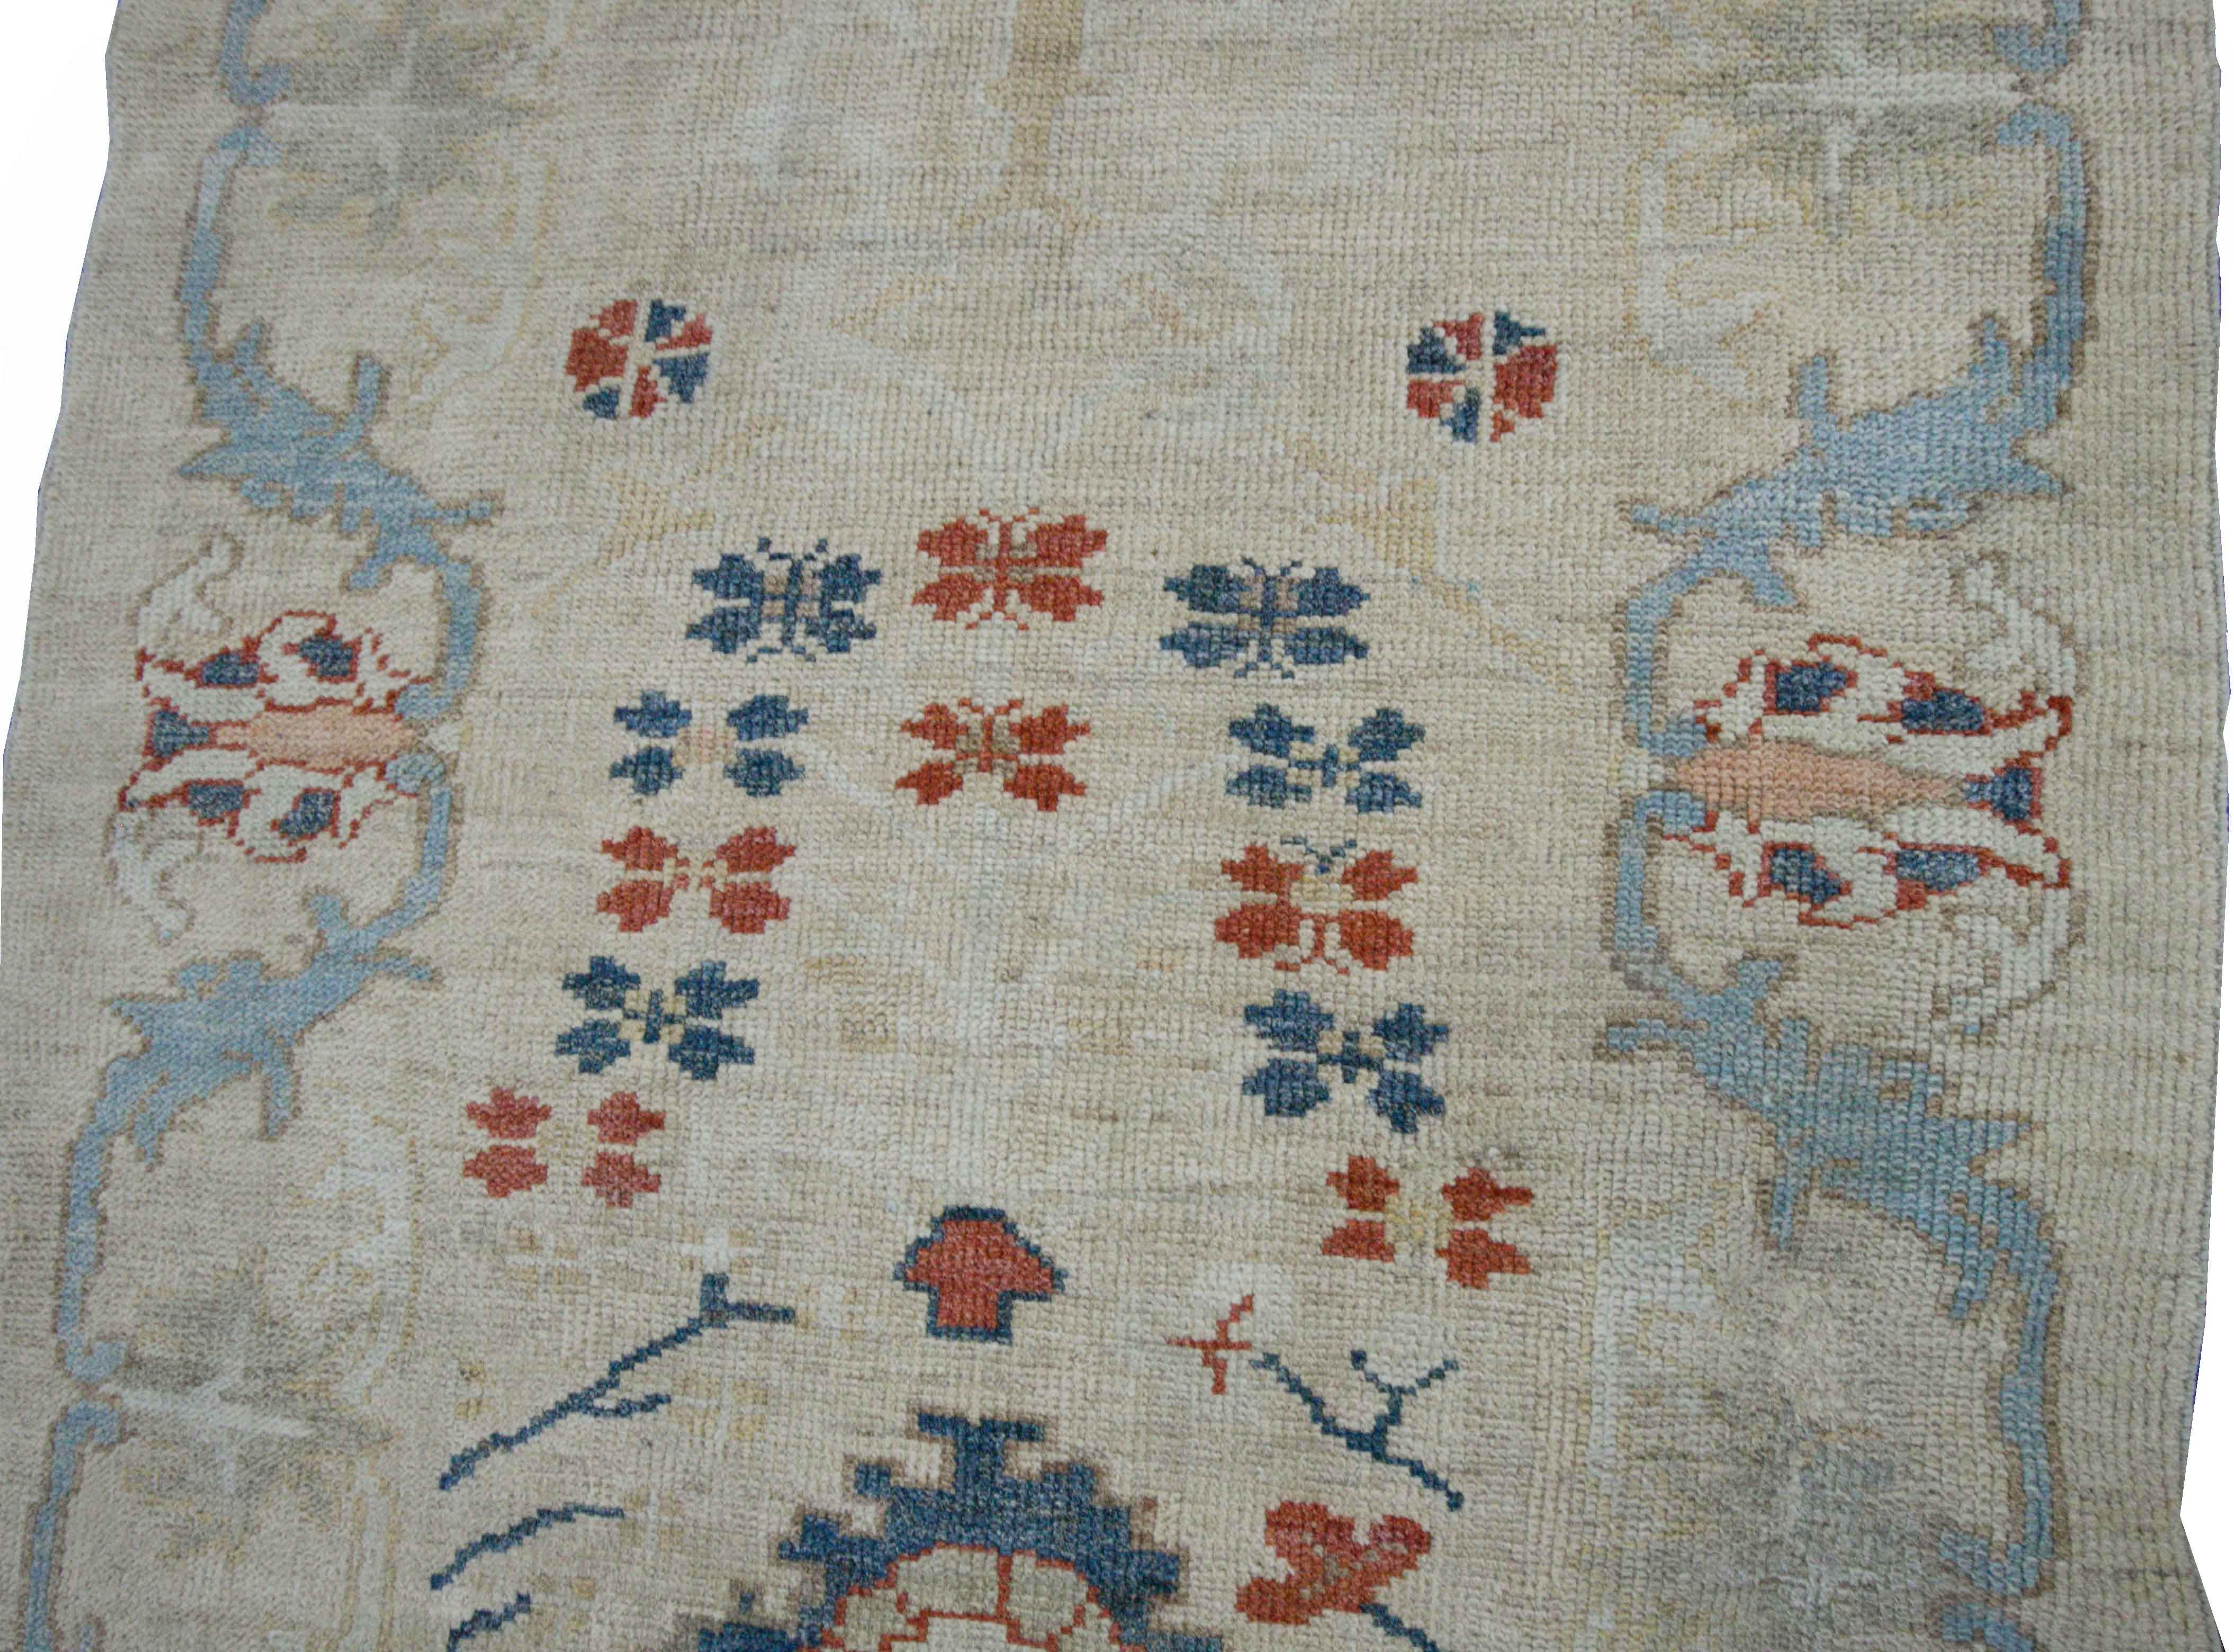 Modern Turkish rug made of handwoven sheep’s wool of the finest quality. It’s colored with organic vegetable dyes that are certified safe for humans and pets alike. It features an ivory field with unique floral details in red, blue and navy